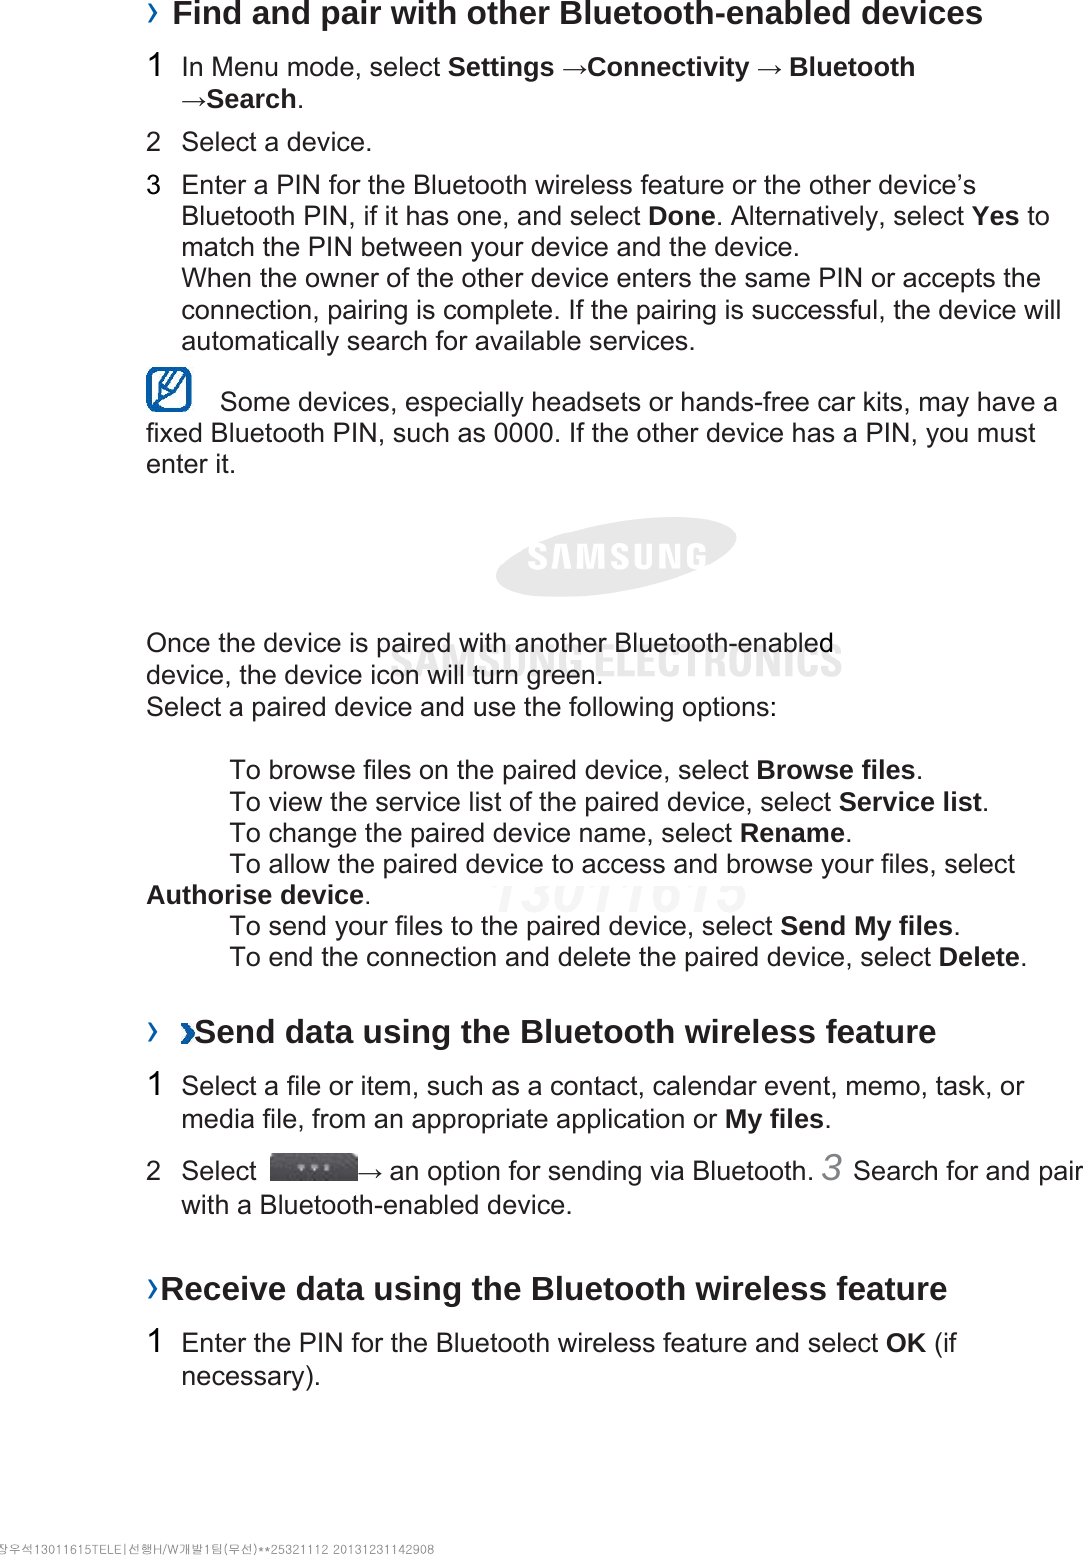 › Find and pair with other Bluetooth-enabled devices   1  In Menu mode, select Settings →Connectivity → Bluetooth →Search.  2  Select a device.   3  Enter a PIN for the Bluetooth wireless feature or the other device’s Bluetooth PIN, if it has one, and select Done. Alternatively, select Yes to match the PIN between your device and the device.   When the owner of the other device enters the same PIN or accepts the connection, pairing is complete. If the pairing is successful, the device will automatically search for available services.     Some devices, especially headsets or hands-free car kits, may have a fixed Bluetooth PIN, such as 0000. If the other device has a PIN, you must enter it.   Once the device is paired with another Bluetooth-enabled device, the device icon will turn green. Select a paired device and use the following options:    To browse files on the paired device, select Browse files.    To view the service list of the paired device, select Service list.    To change the paired device name, select Rename.   To allow the paired device to access and browse your files, select Authorise device.    To send your files to the paired device, select Send My files.    To end the connection and delete the paired device, select Delete.   ›  Send data using the Bluetooth wireless feature   1  Select a file or item, such as a contact, calendar event, memo, task, or media file, from an appropriate application or My files.  2 Select  → an option for sending via Bluetooth. 3 Search for and pair with a Bluetooth-enabled device.   ›Receive data using the Bluetooth wireless feature   1  Enter the PIN for the Bluetooth wireless feature and select OK (if necessary).  